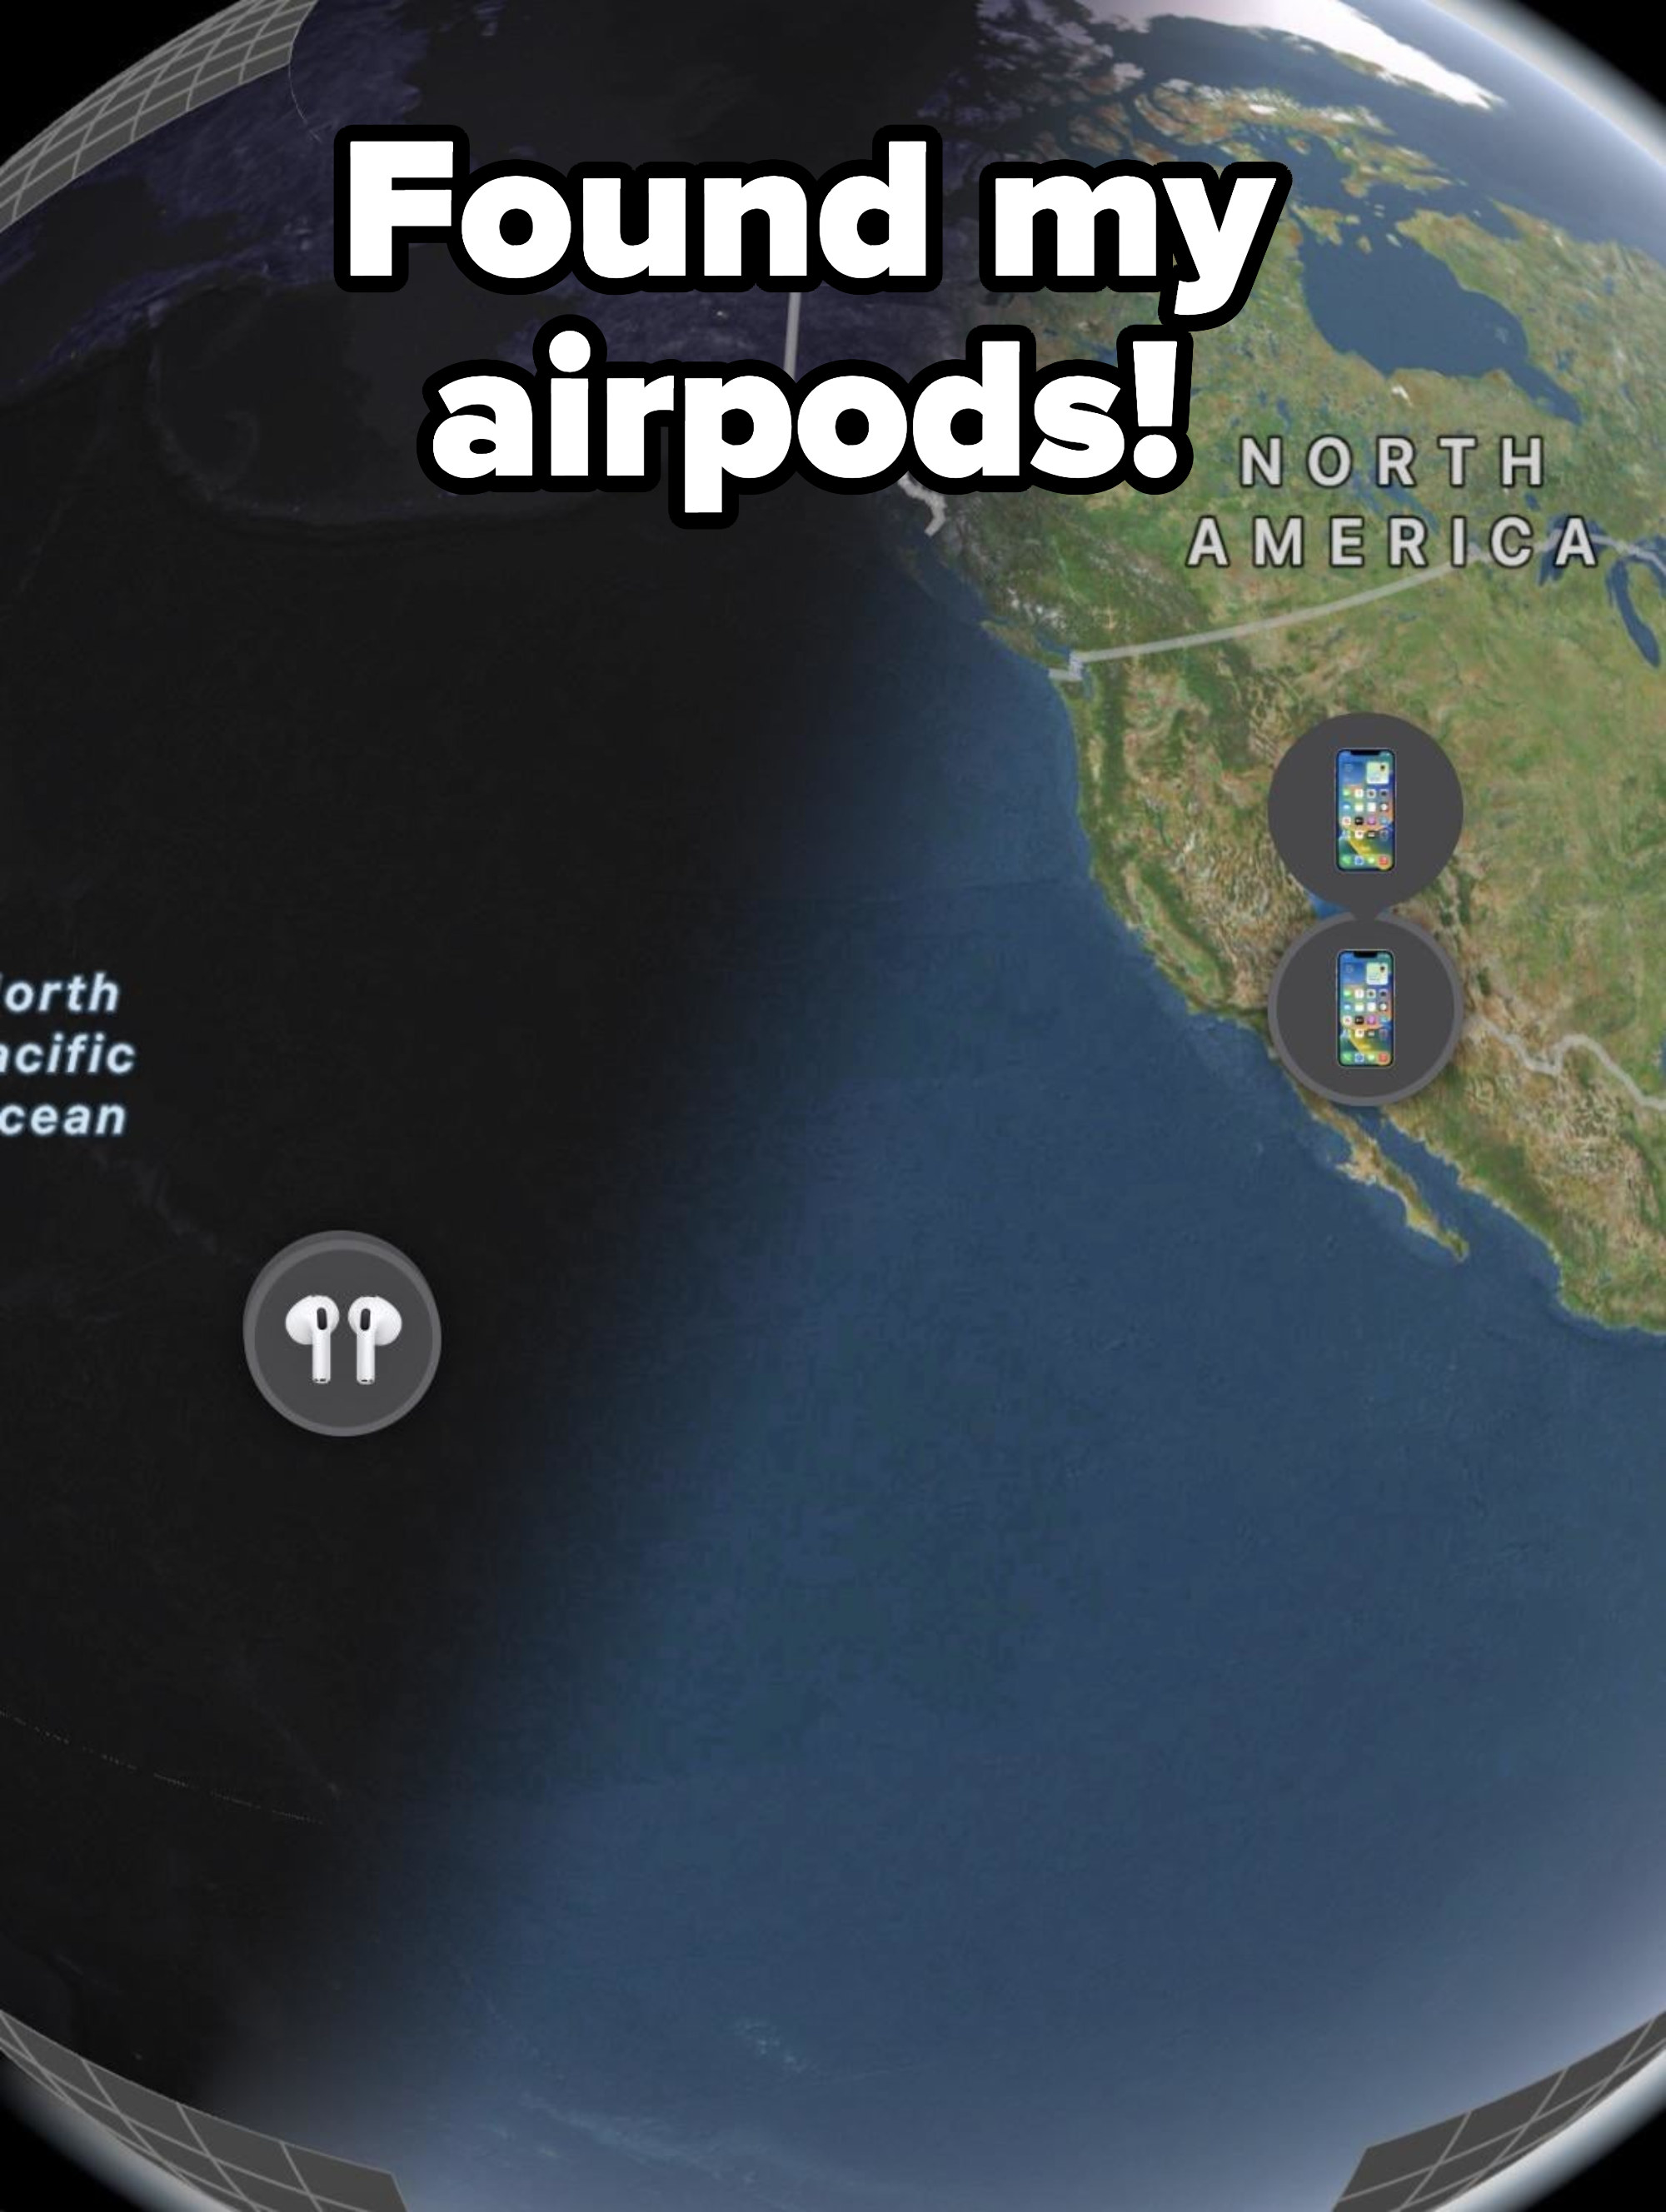 AirPods in Hawaii, far away from the user